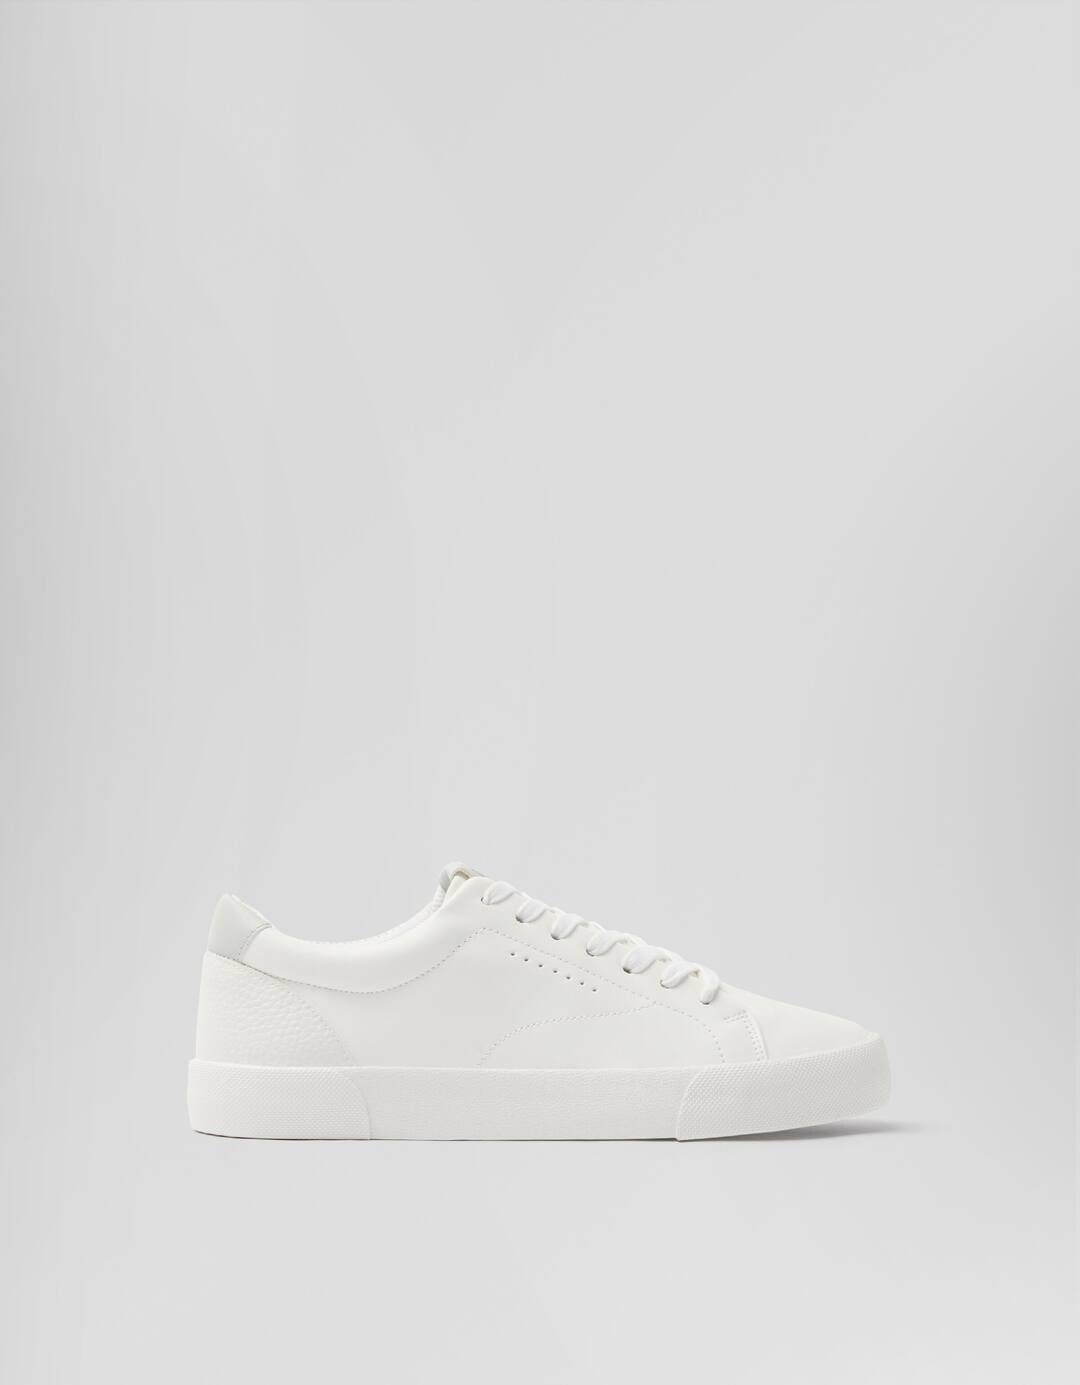 Men’s trainers with coloured heel detail